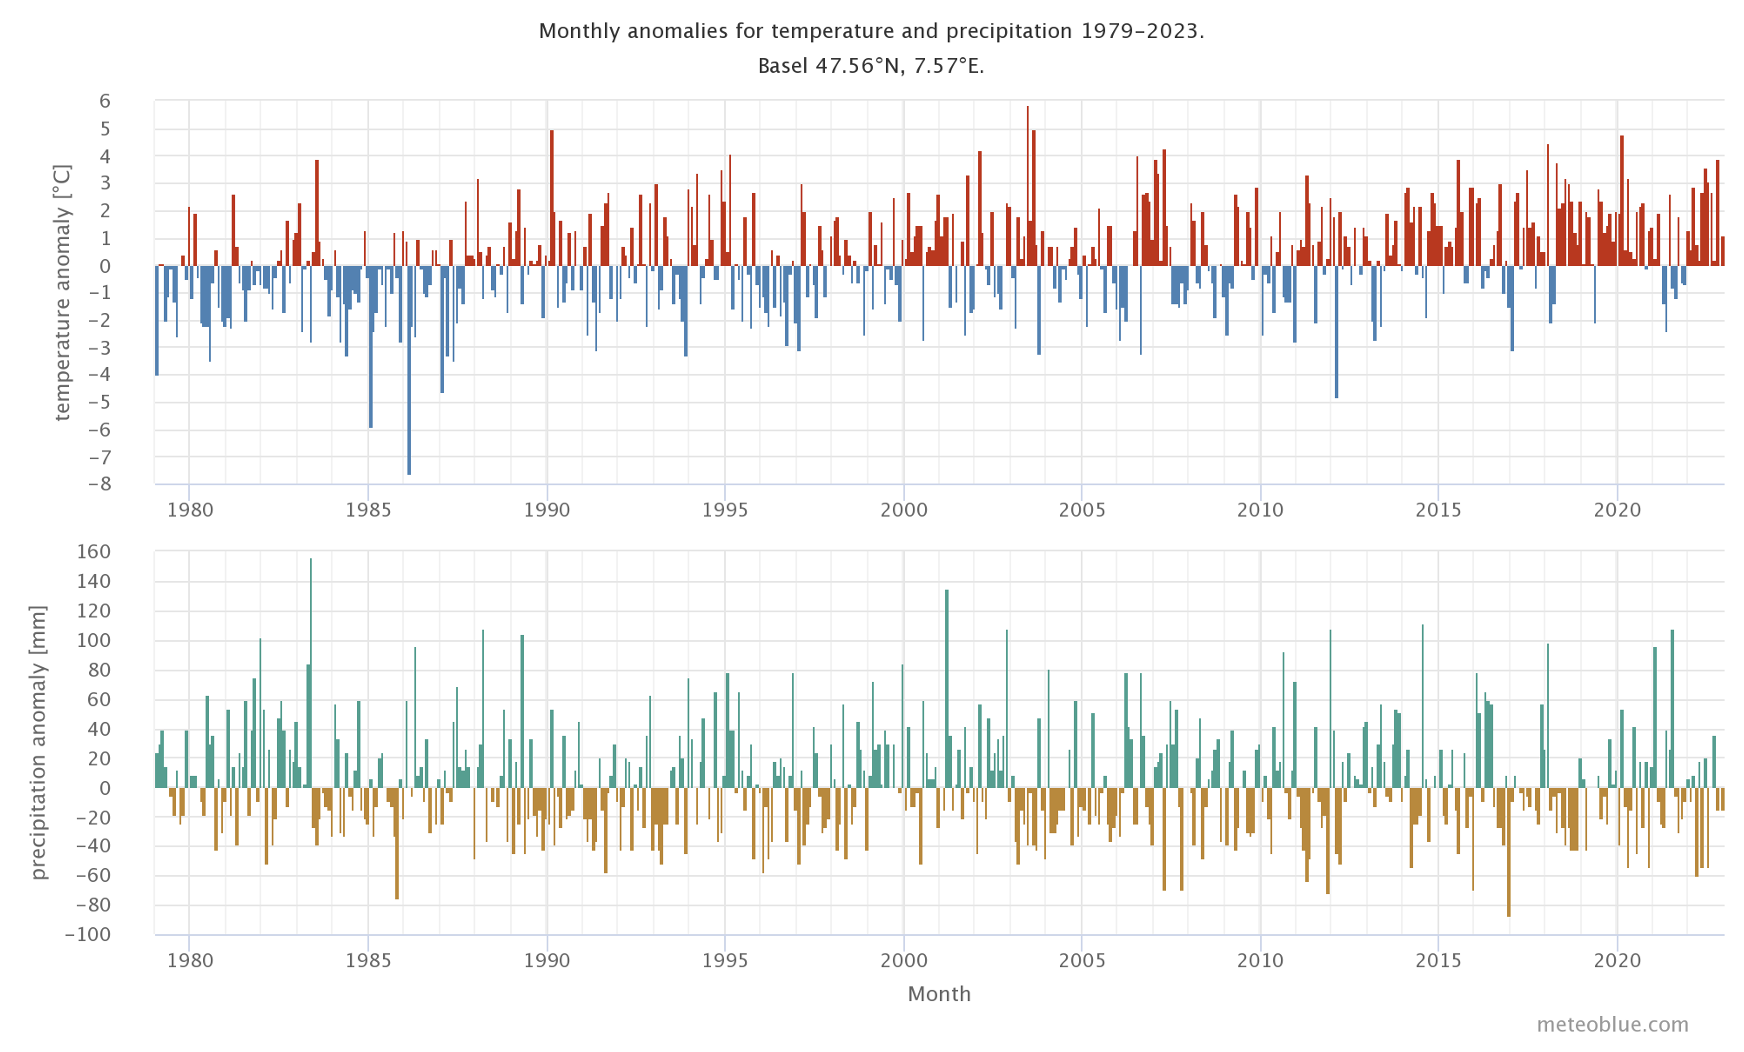 Monthly anomalies for temperature and precipitation in Basel, overview from 1979 until today.